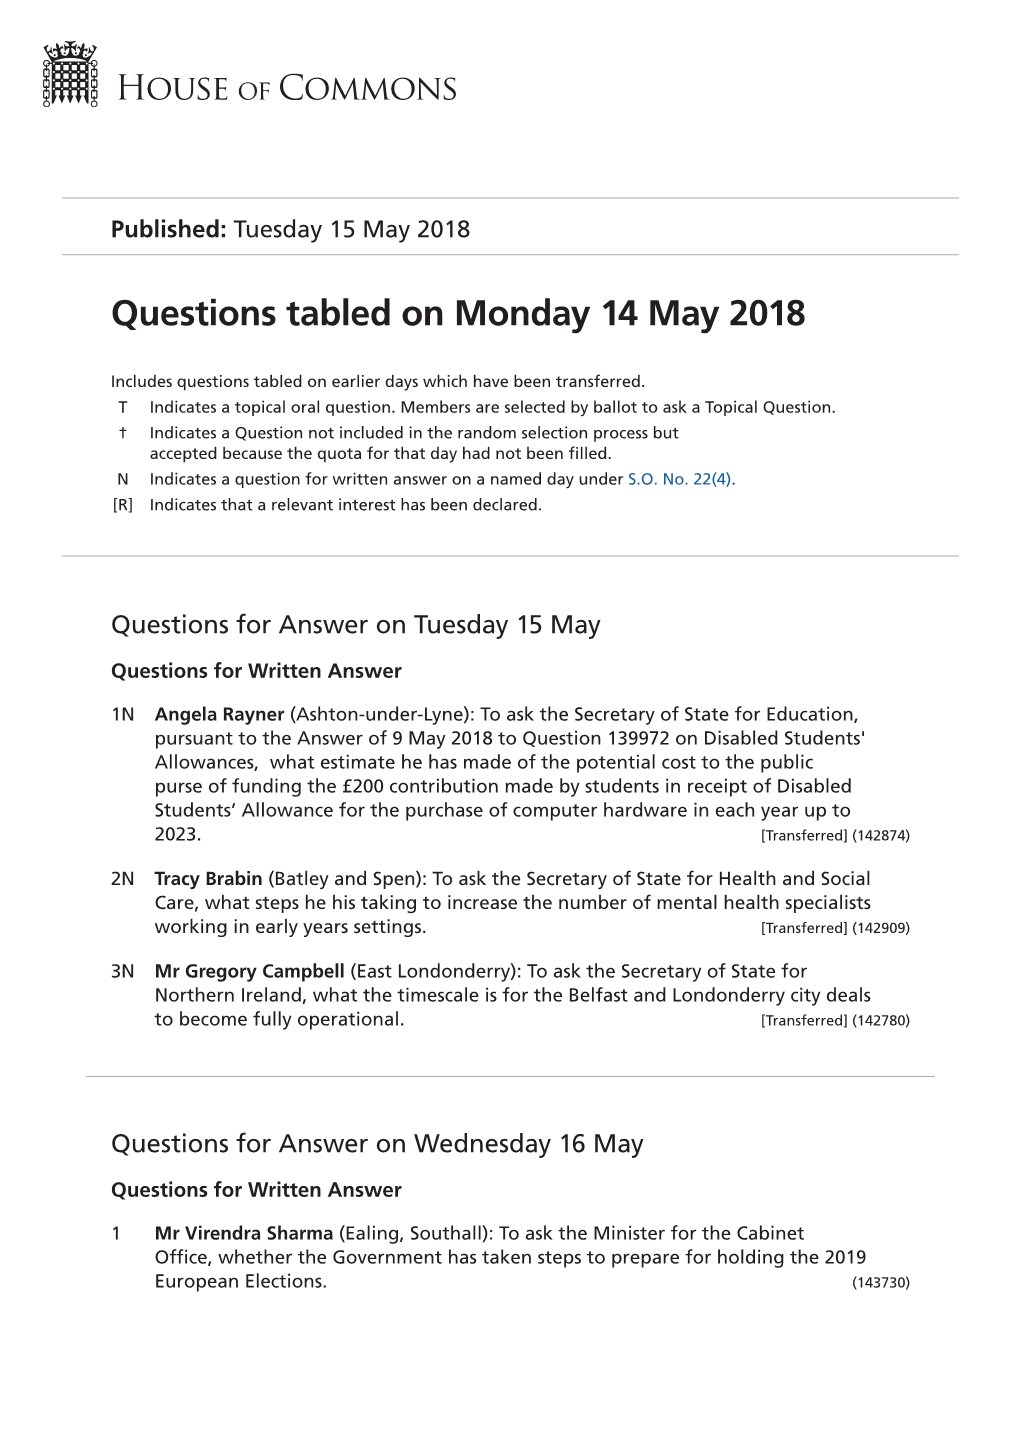 Questions Tabled on Mon 14 May 2018